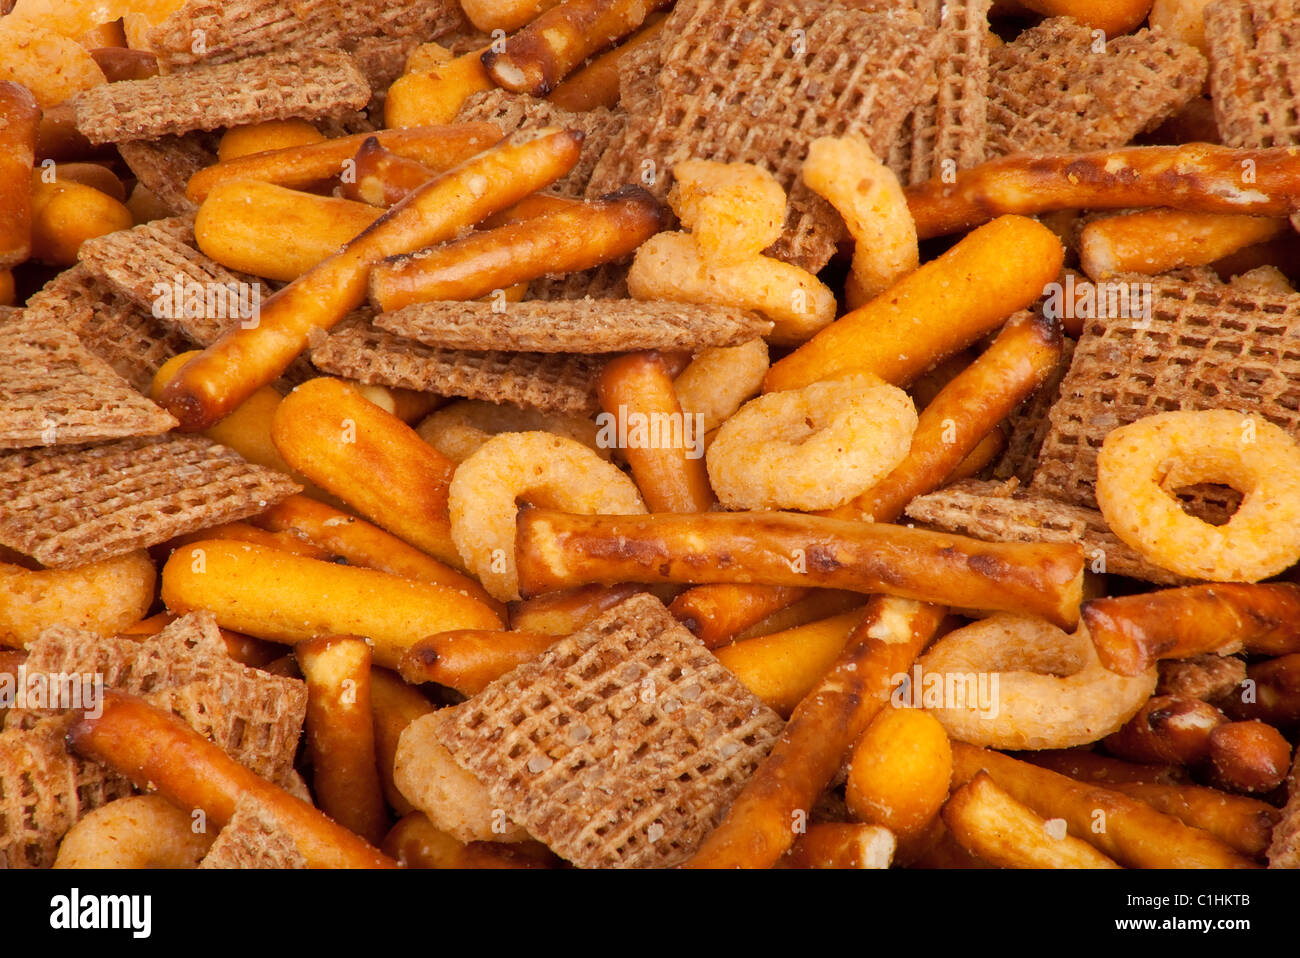 This is a mix of salted pretzels, cereal squares and cheezy bread crisps. Stock Photo